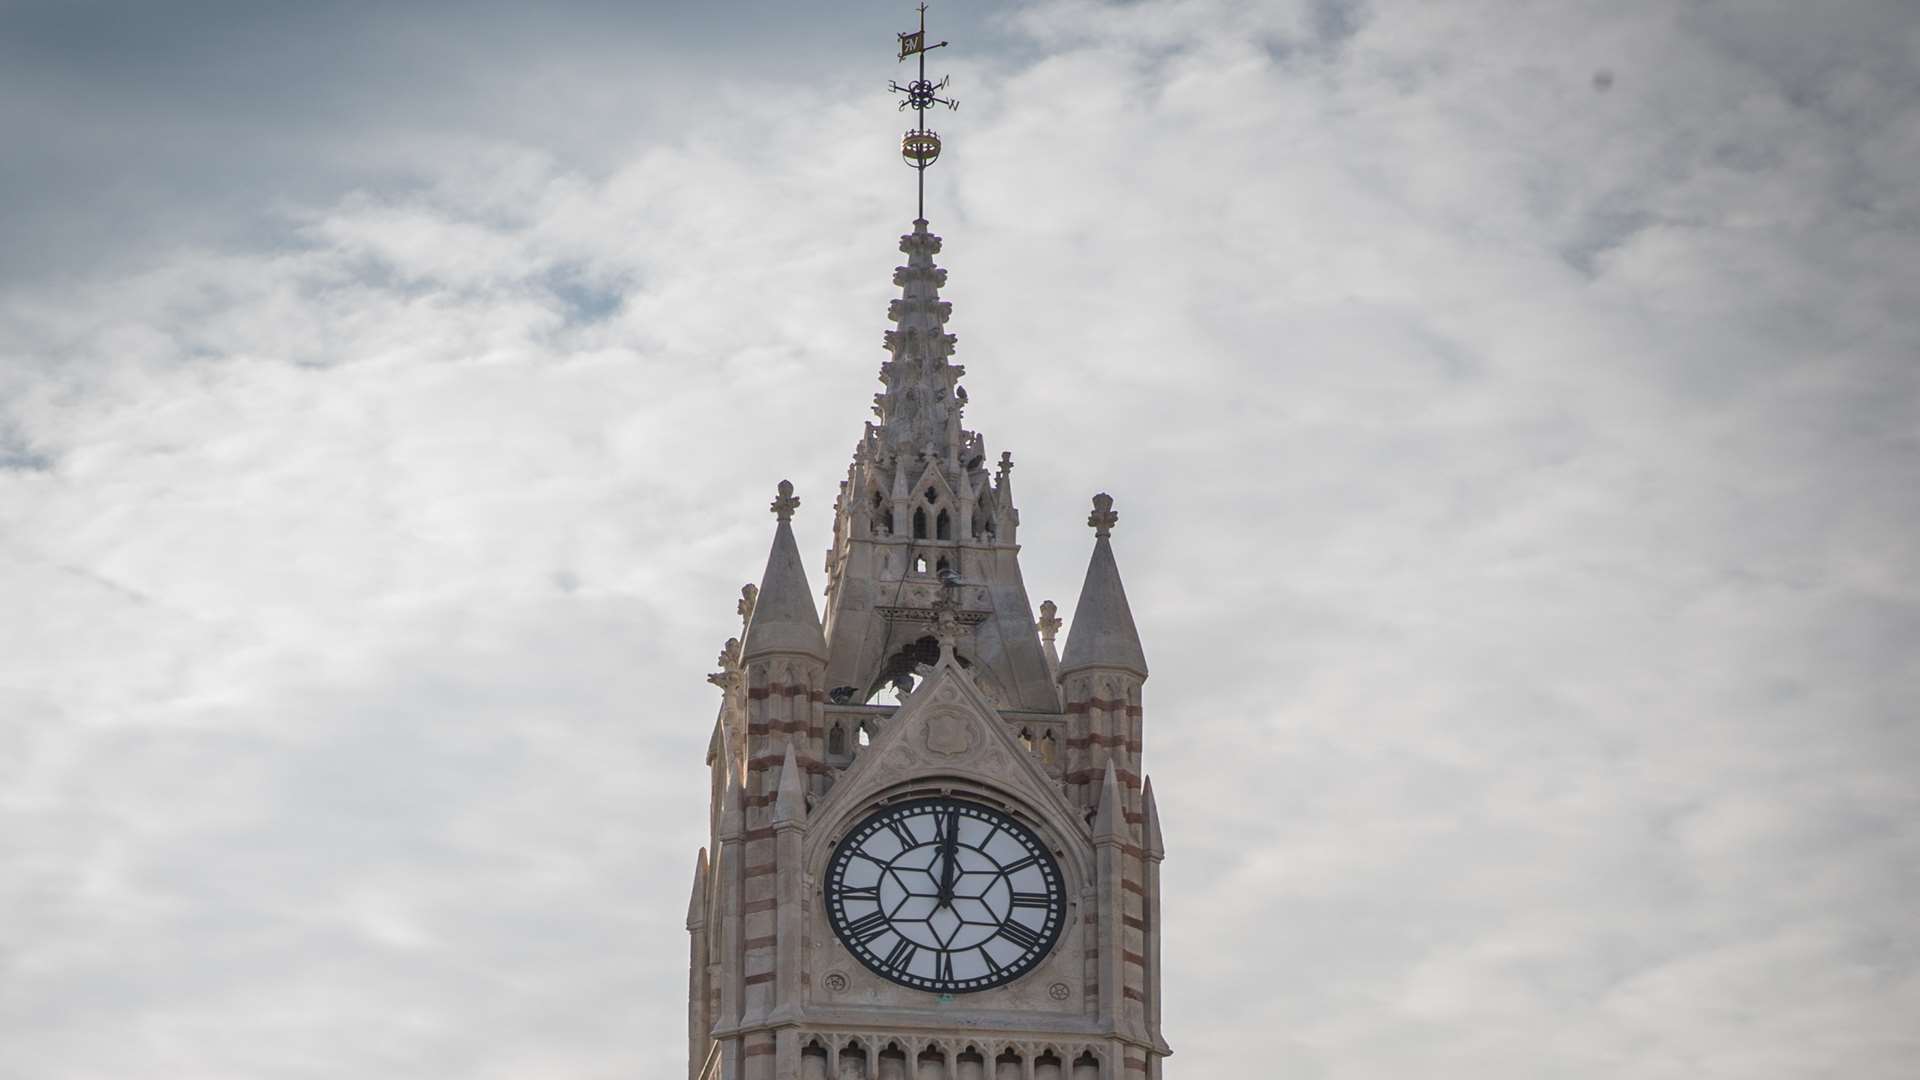 The Clock Tower has been restored to its former glory.